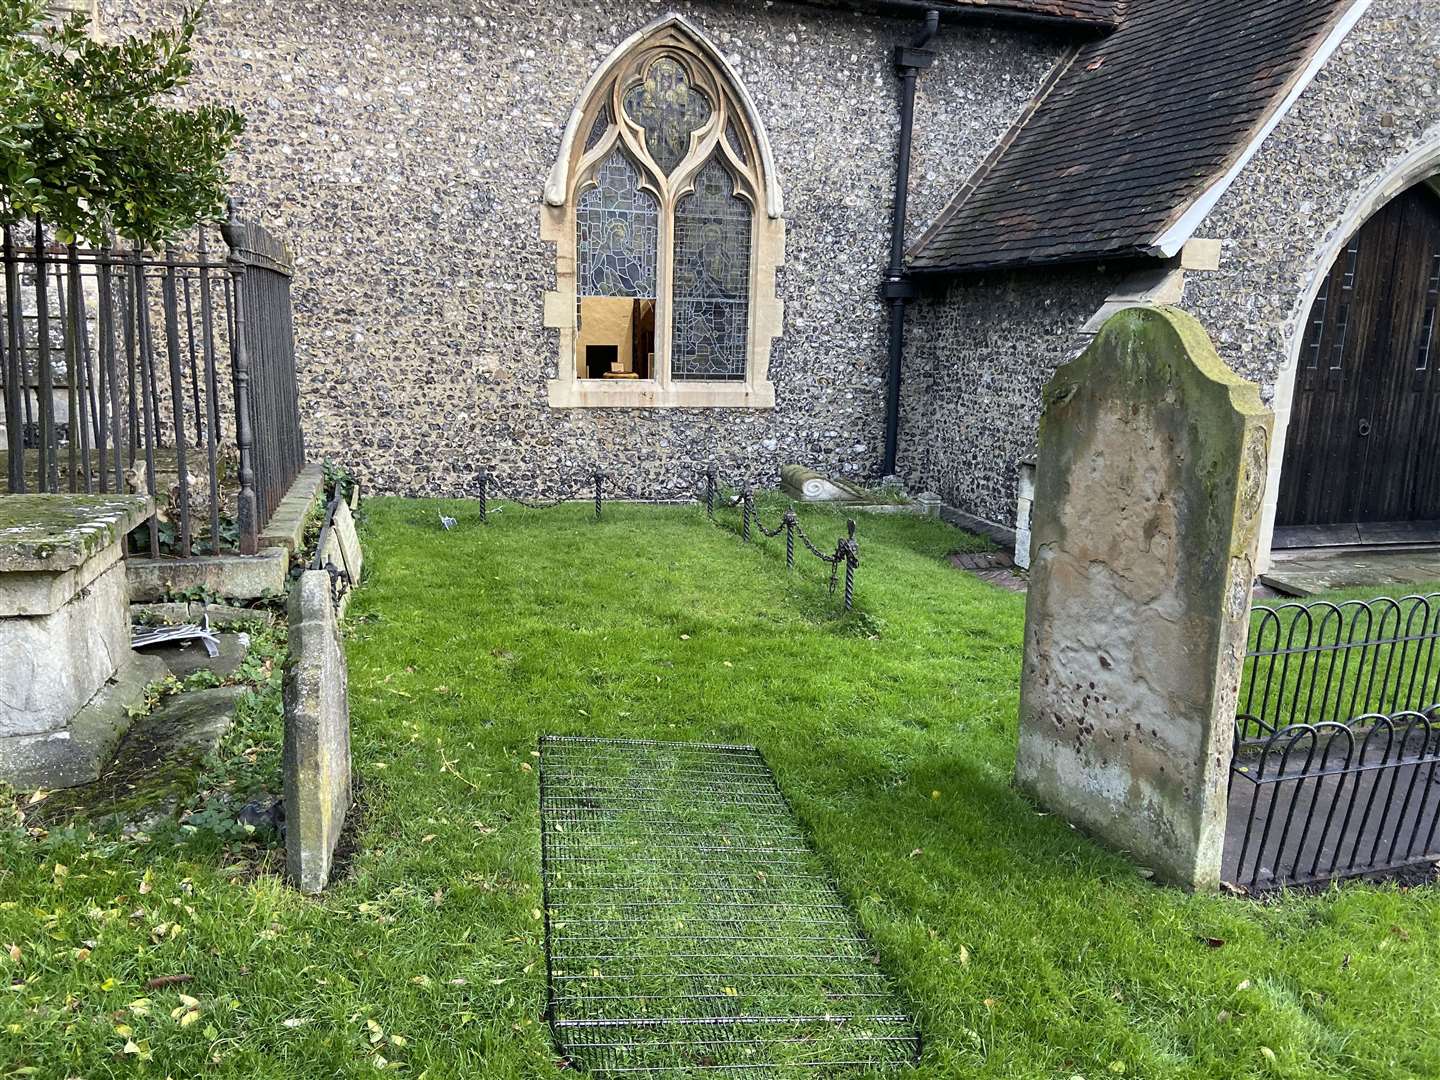 Thieves broke into the church after smashing a window